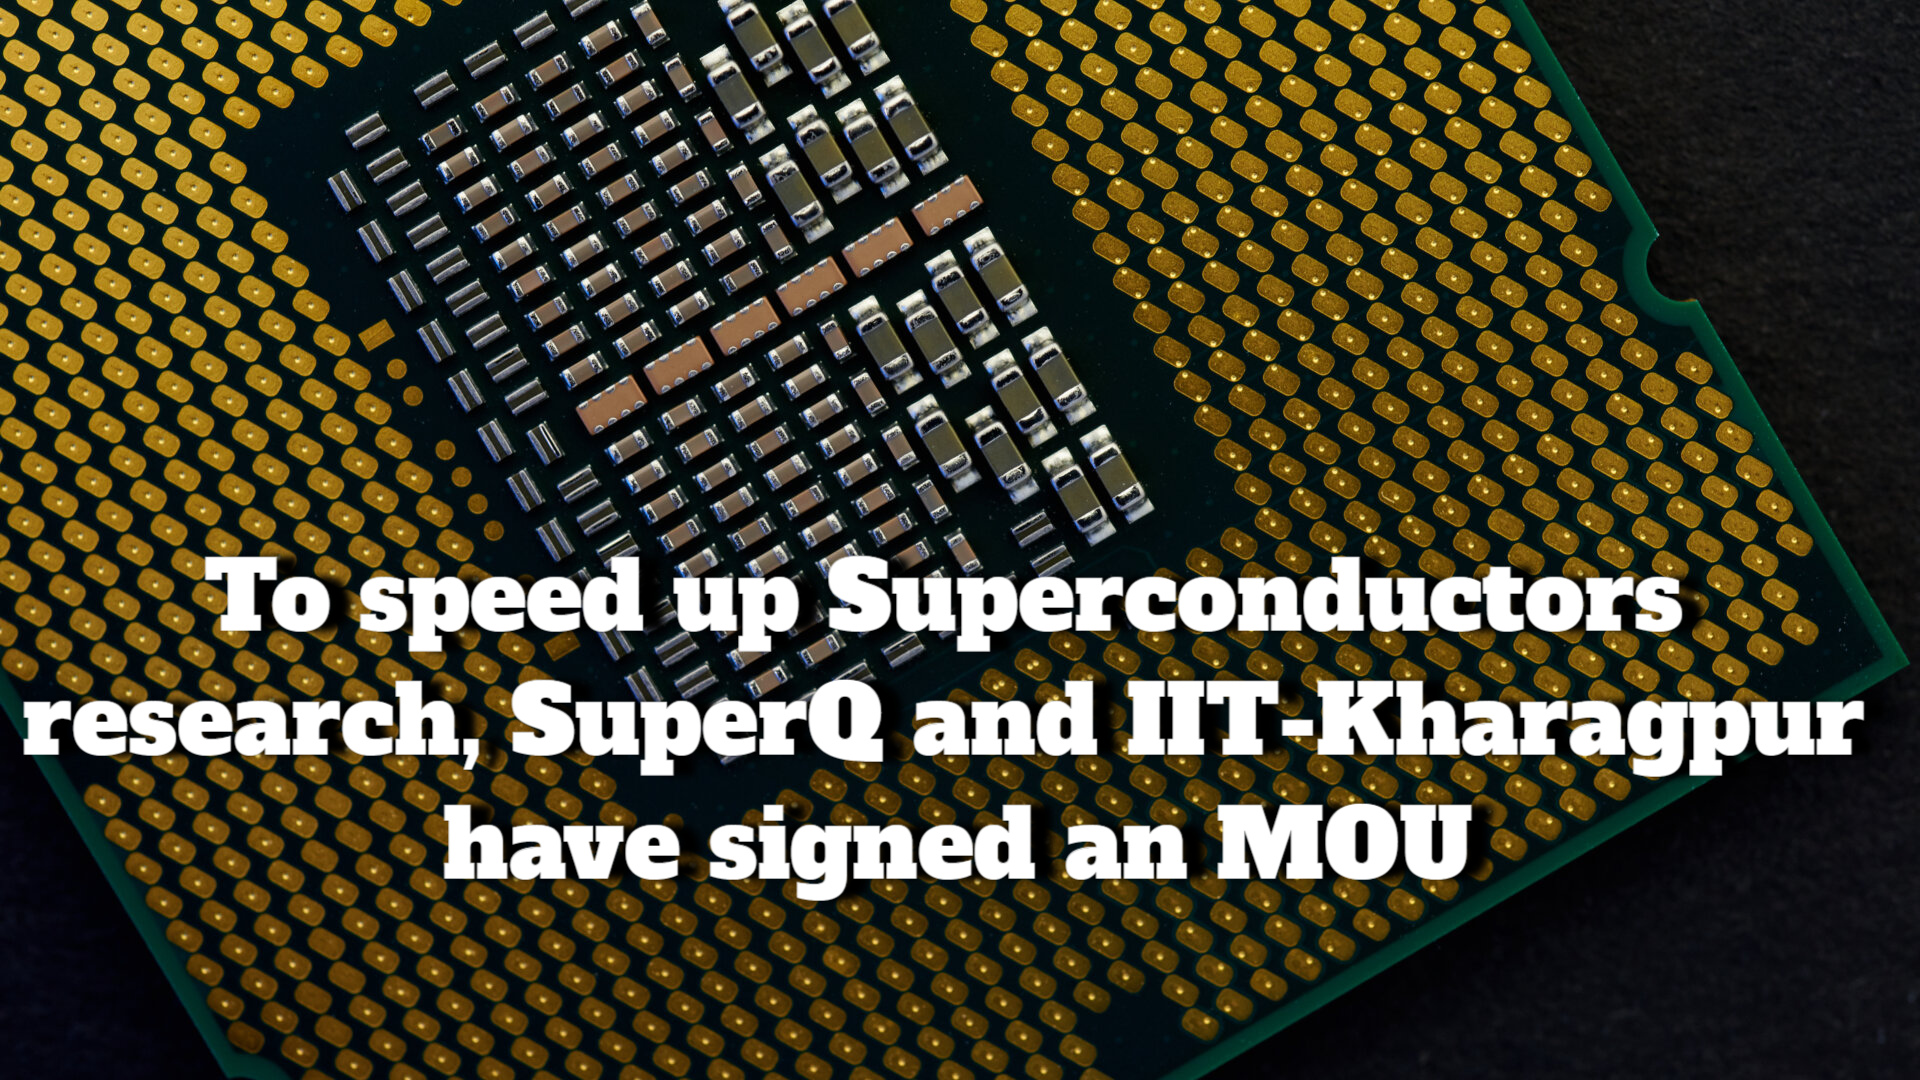 SuperQ and IIT-Kharagpur have signed a MOU to speed up superconductivity research